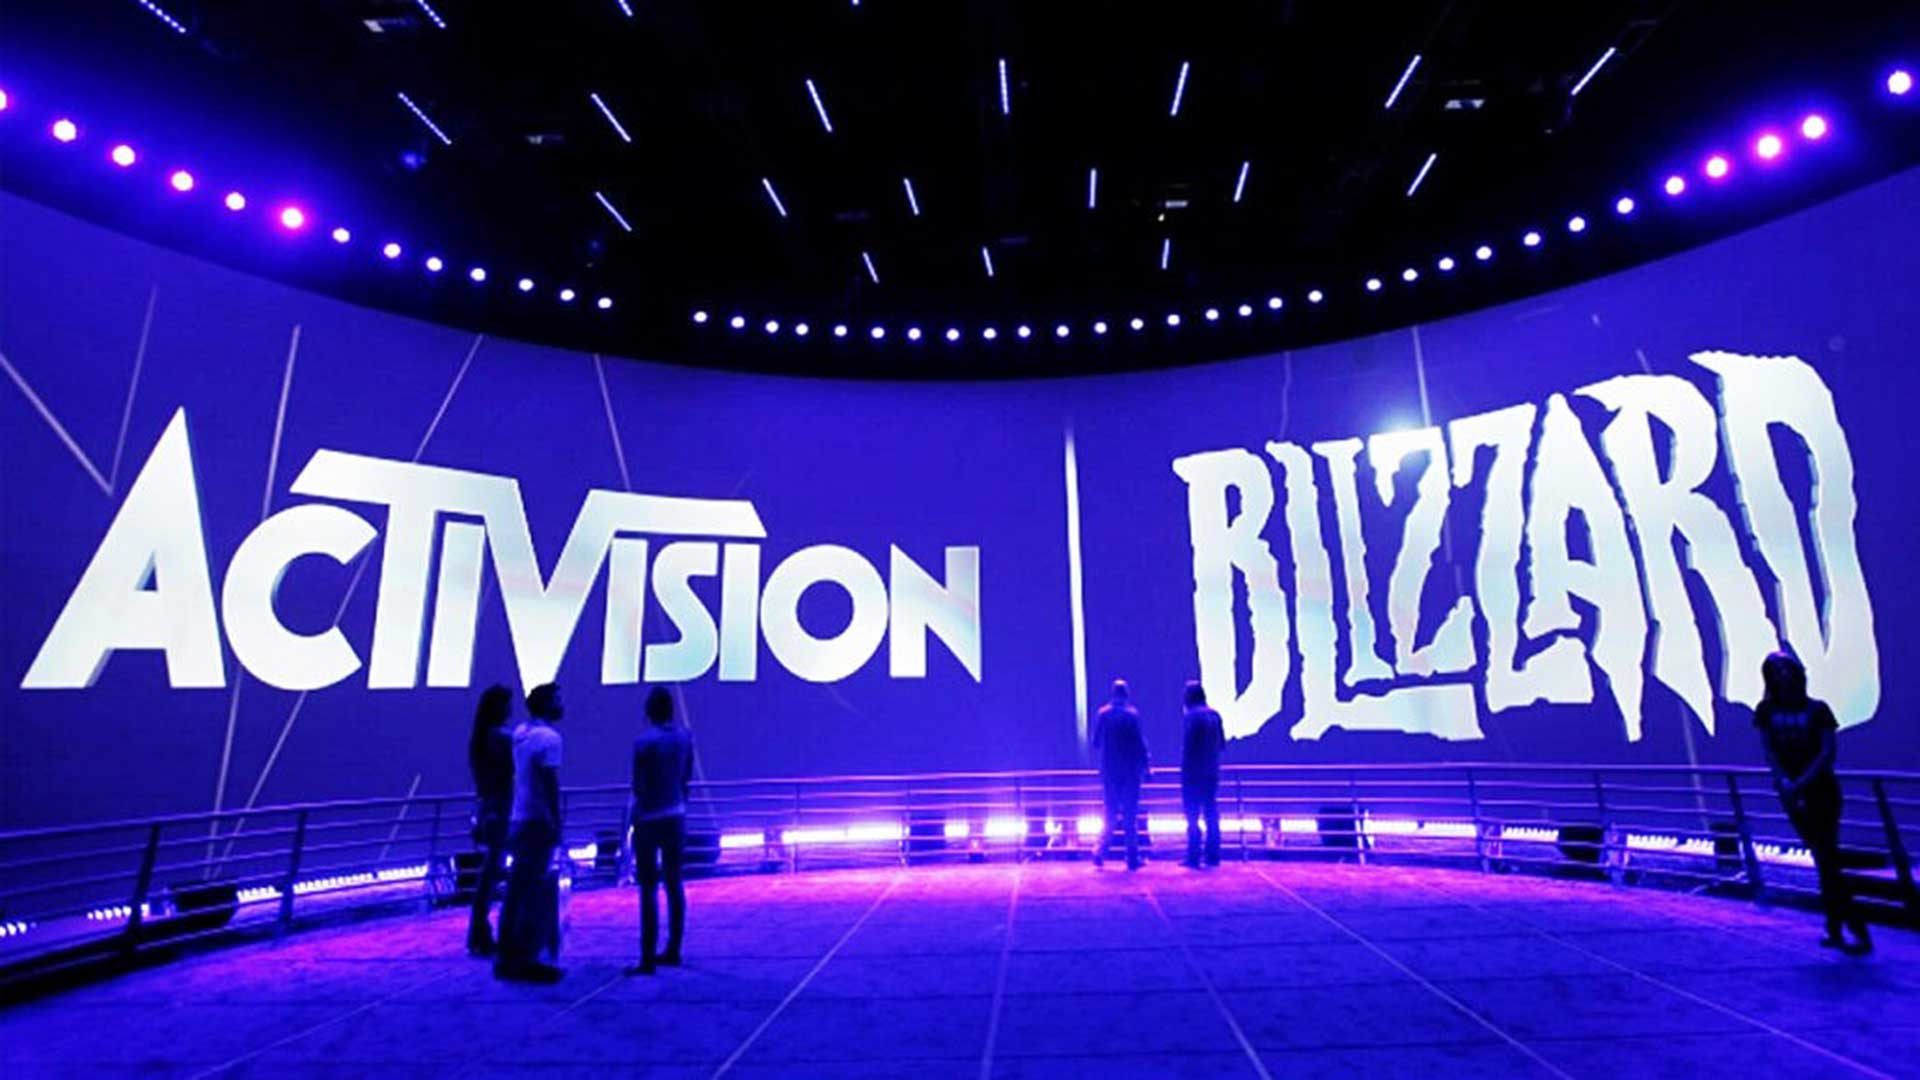 Microsoft's purchase of Activision Blizzard blocked by UK regulators